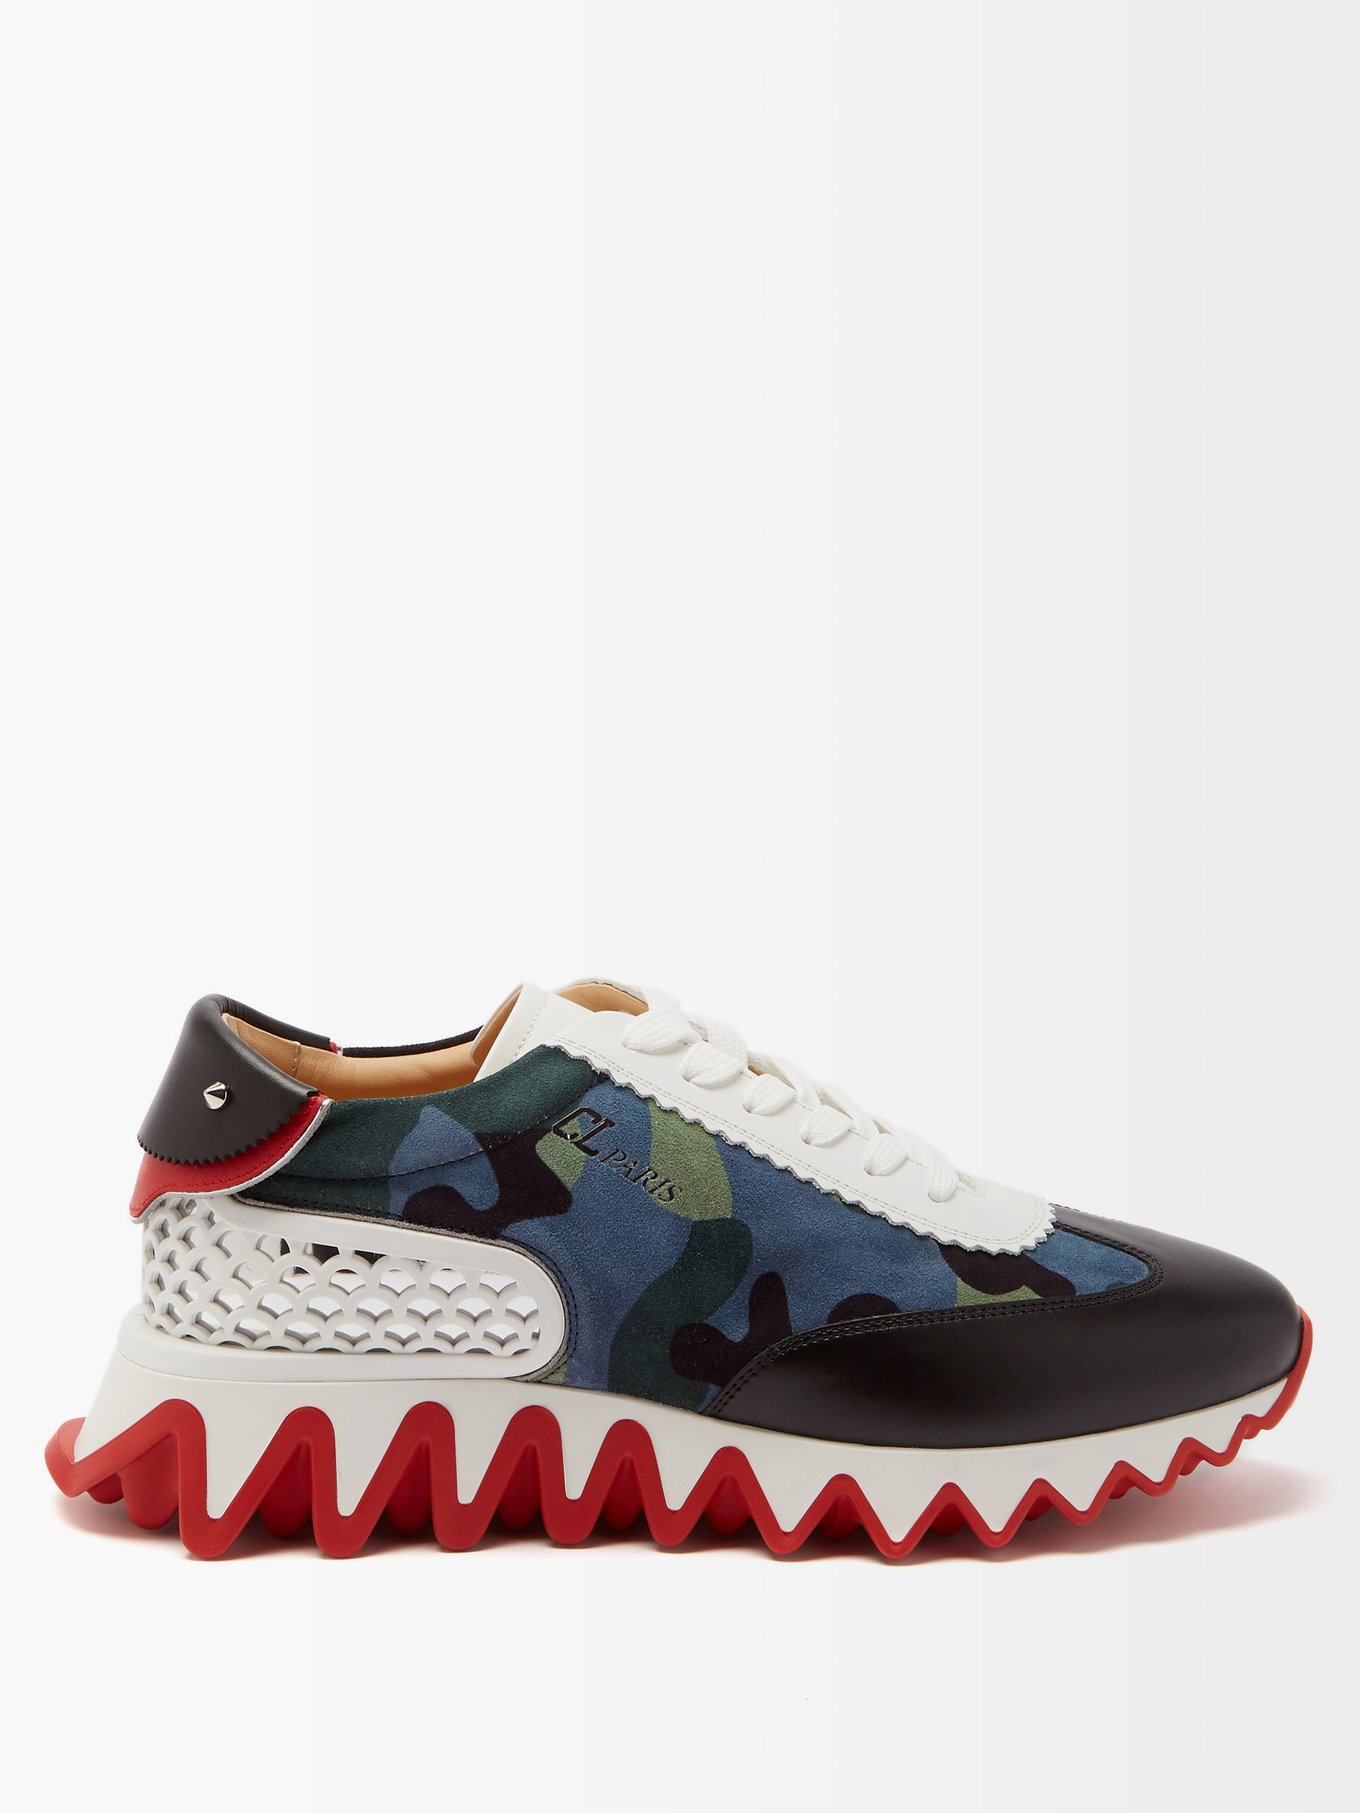 Christian Louboutin Mens Shoes Blue Spikes Red Bottom Size 40.5